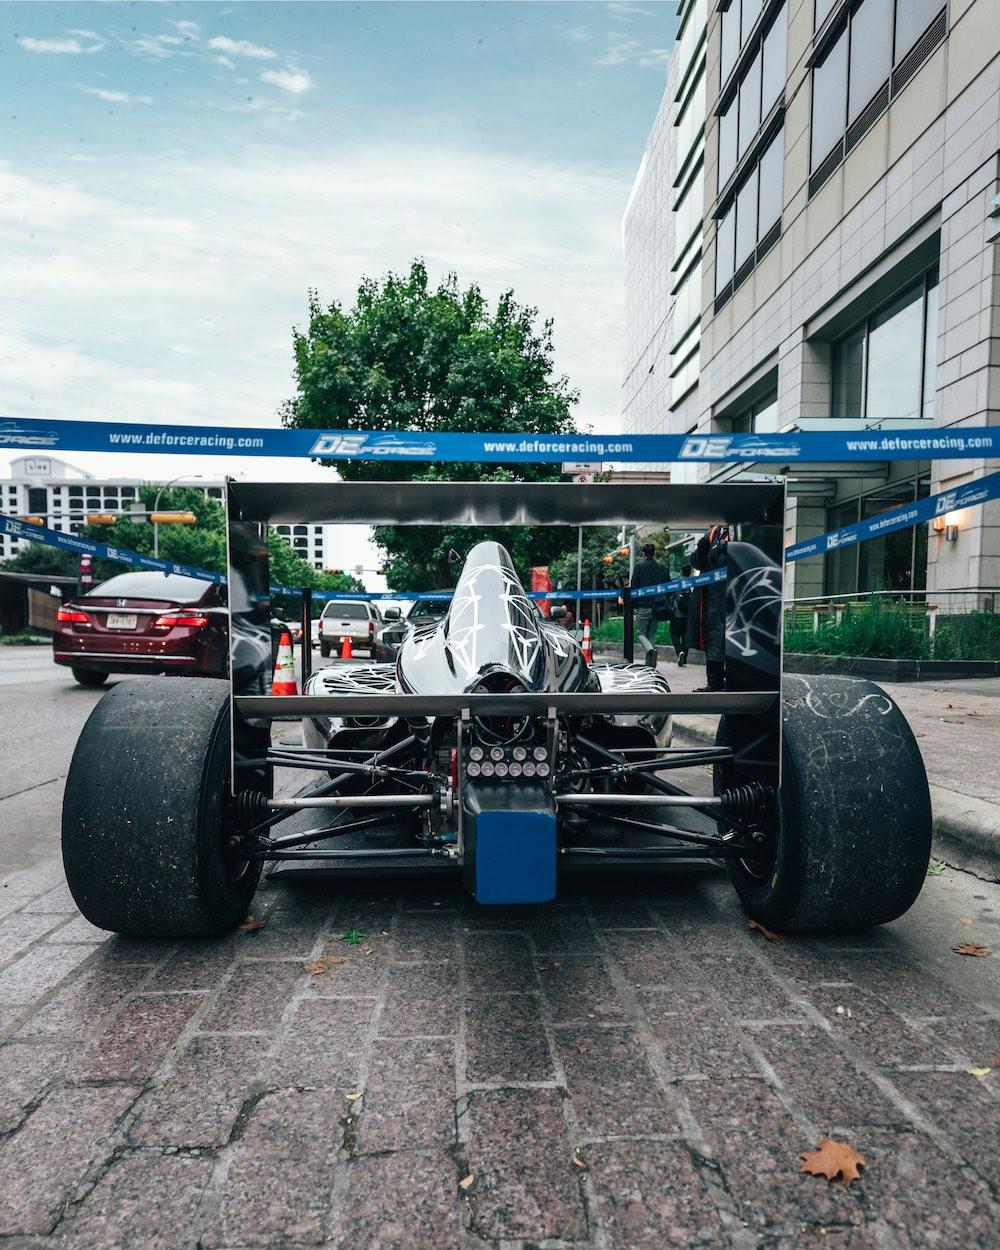 A back-end view of the Valkyrie Velocity on Congress Ave in anticipation of the 2019 Formula 4 Championship at Circuit of the Americas in Austin, Texas. The wrap was designed by UT Austin senior Hadley Chillura